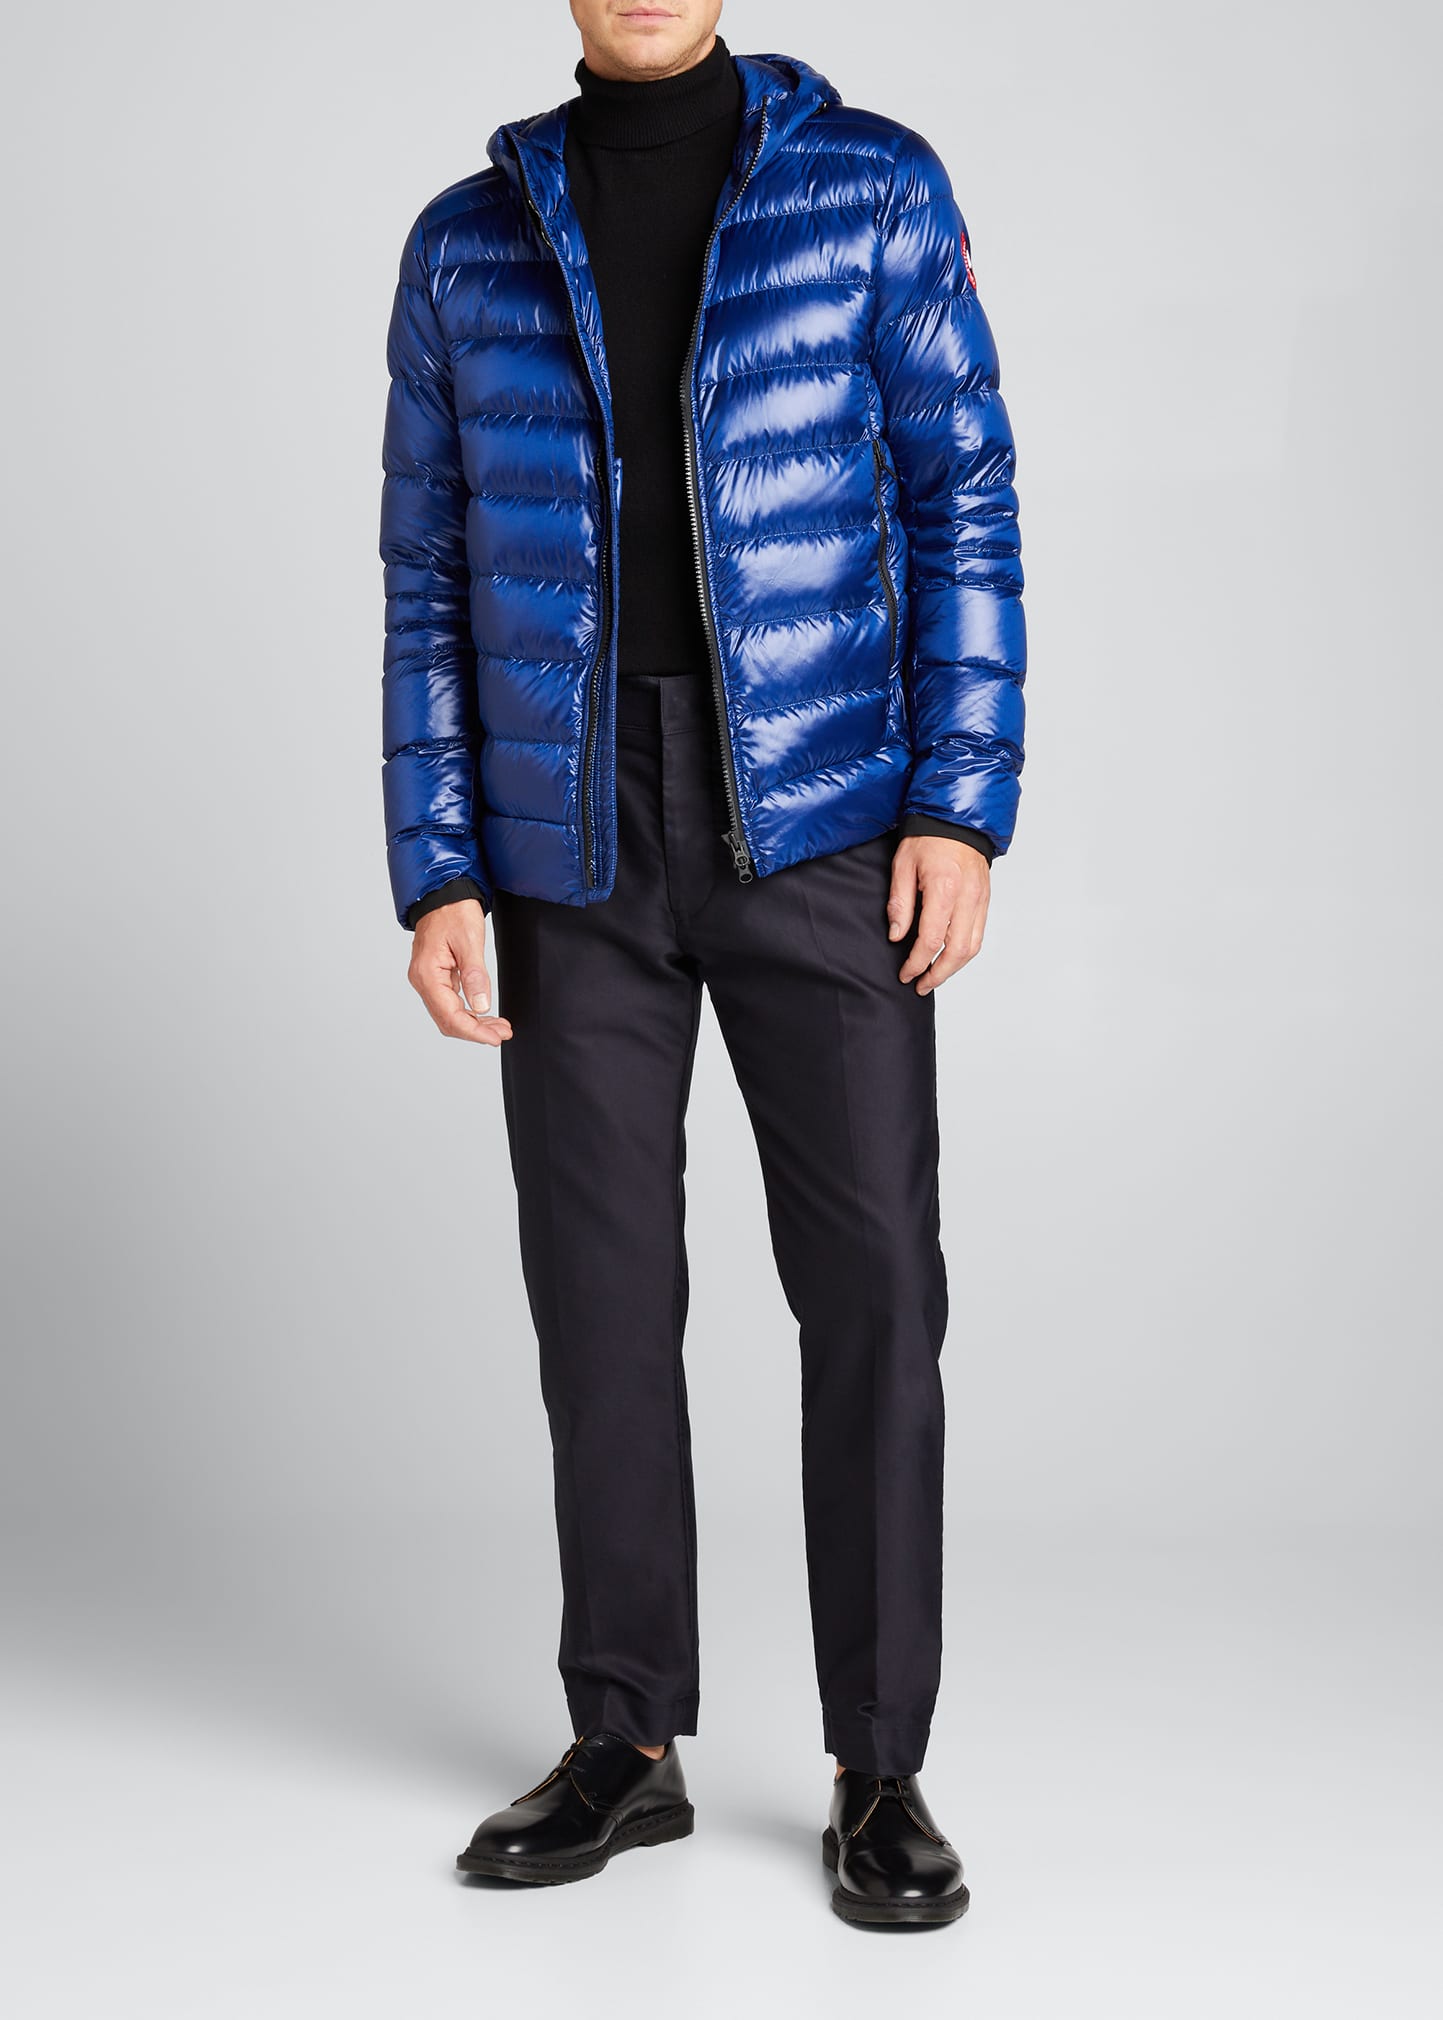 Canada Goose Men's Crofton Quilted Hooded Jacket